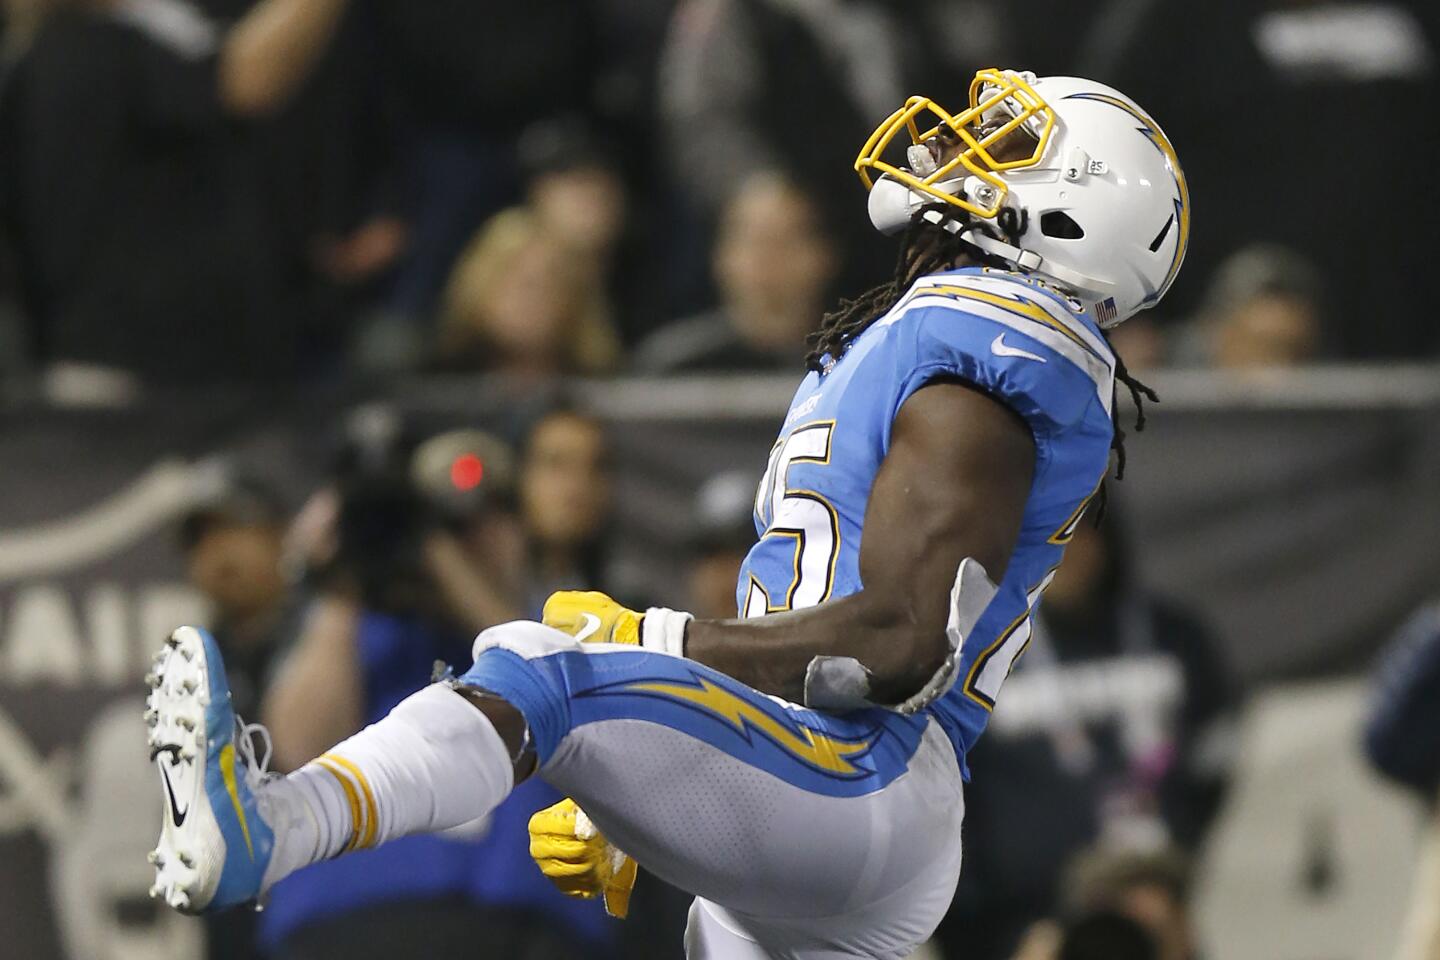 Chargers running back Melvin Gordon celebrates after scoring a touchdown against the Raiders during the first half of a game Nov. 7 at RingCentral Coliseum.